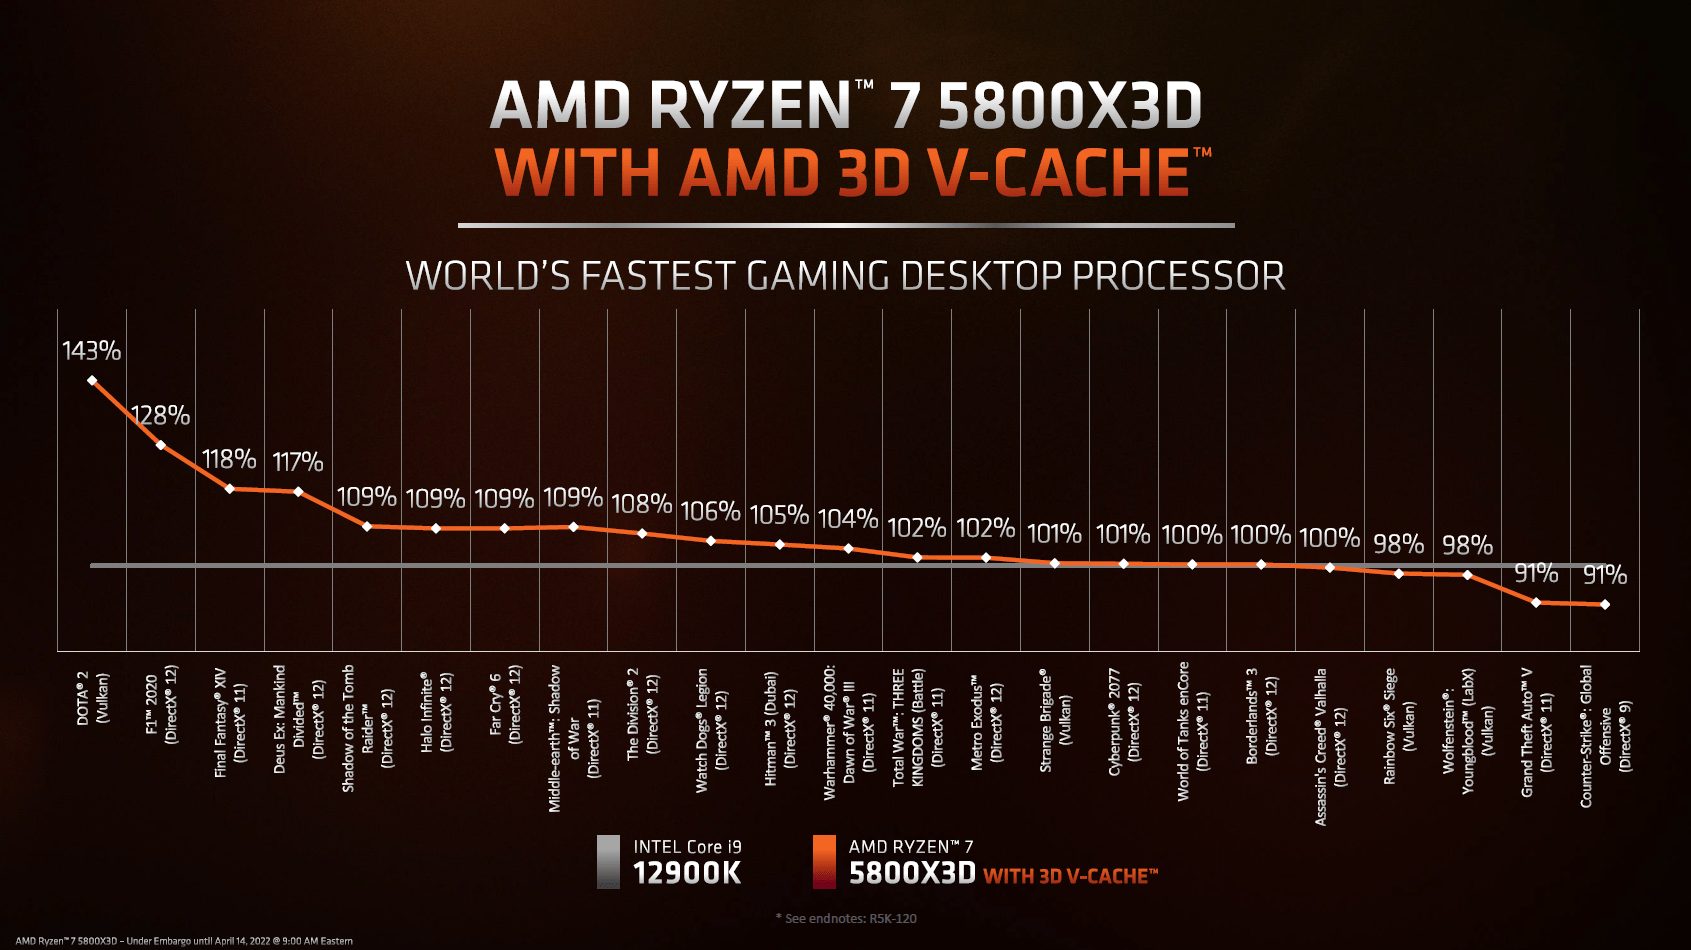 Testing the AMD Ryzen 7 5800X3D: not the best gaming CPU, but a